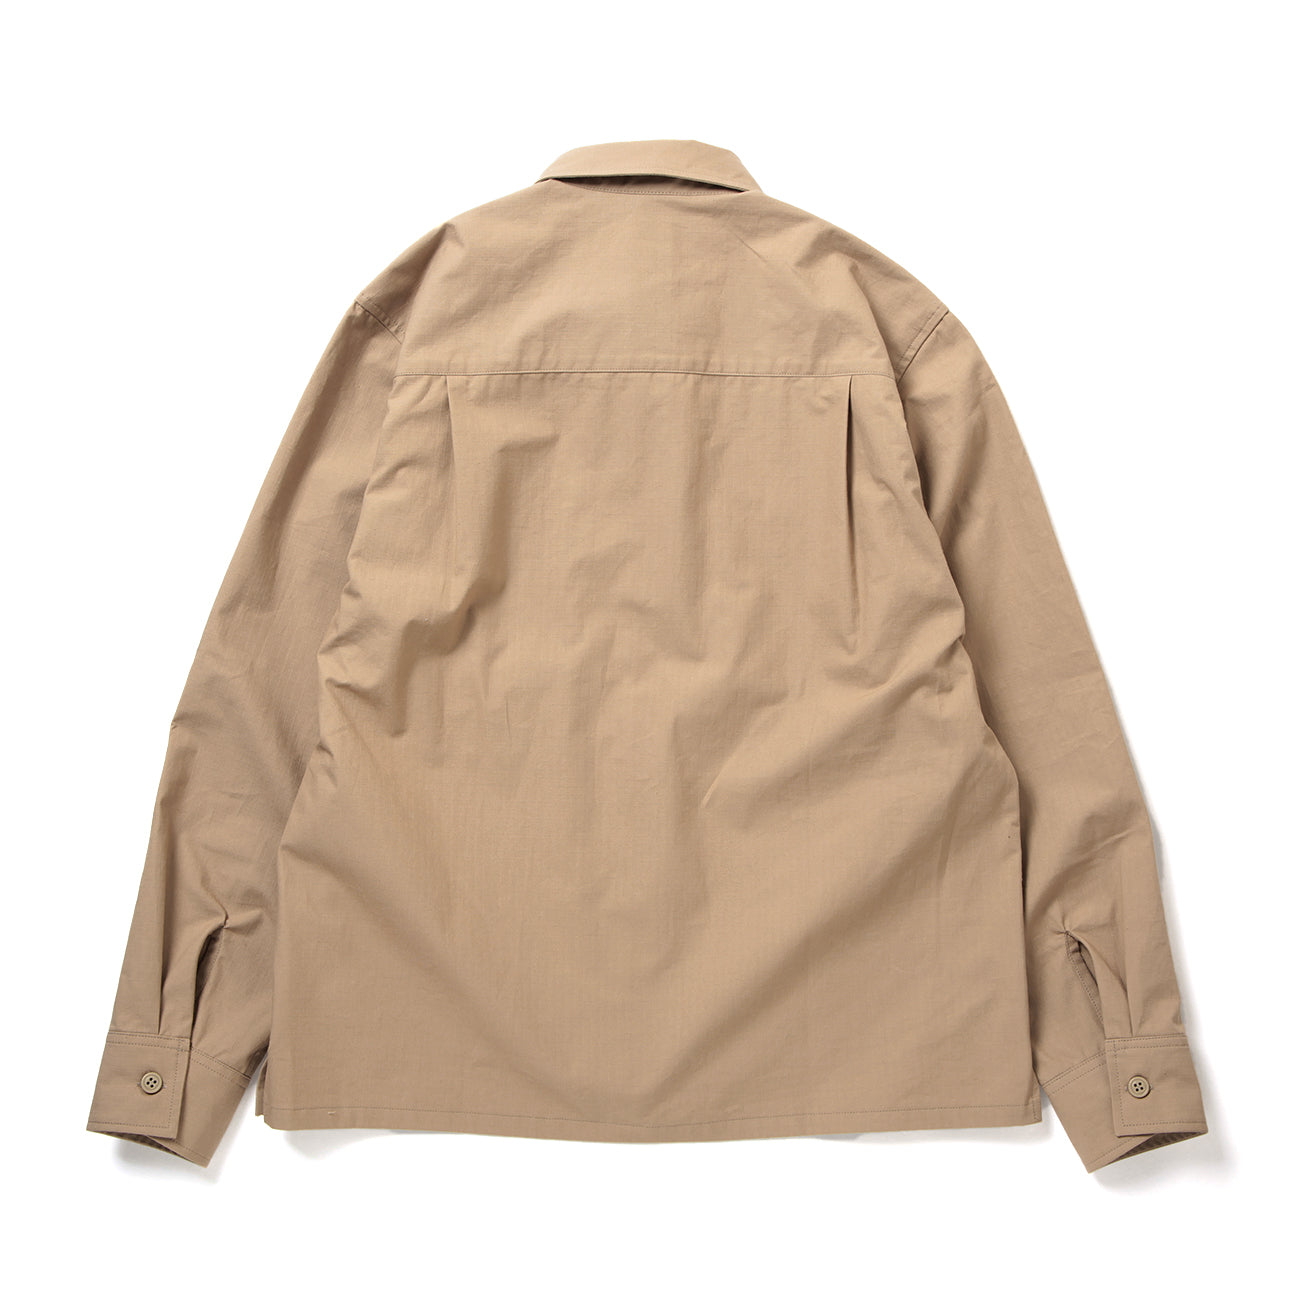 KED SHIRTS (RIP STOP) - BEIGE